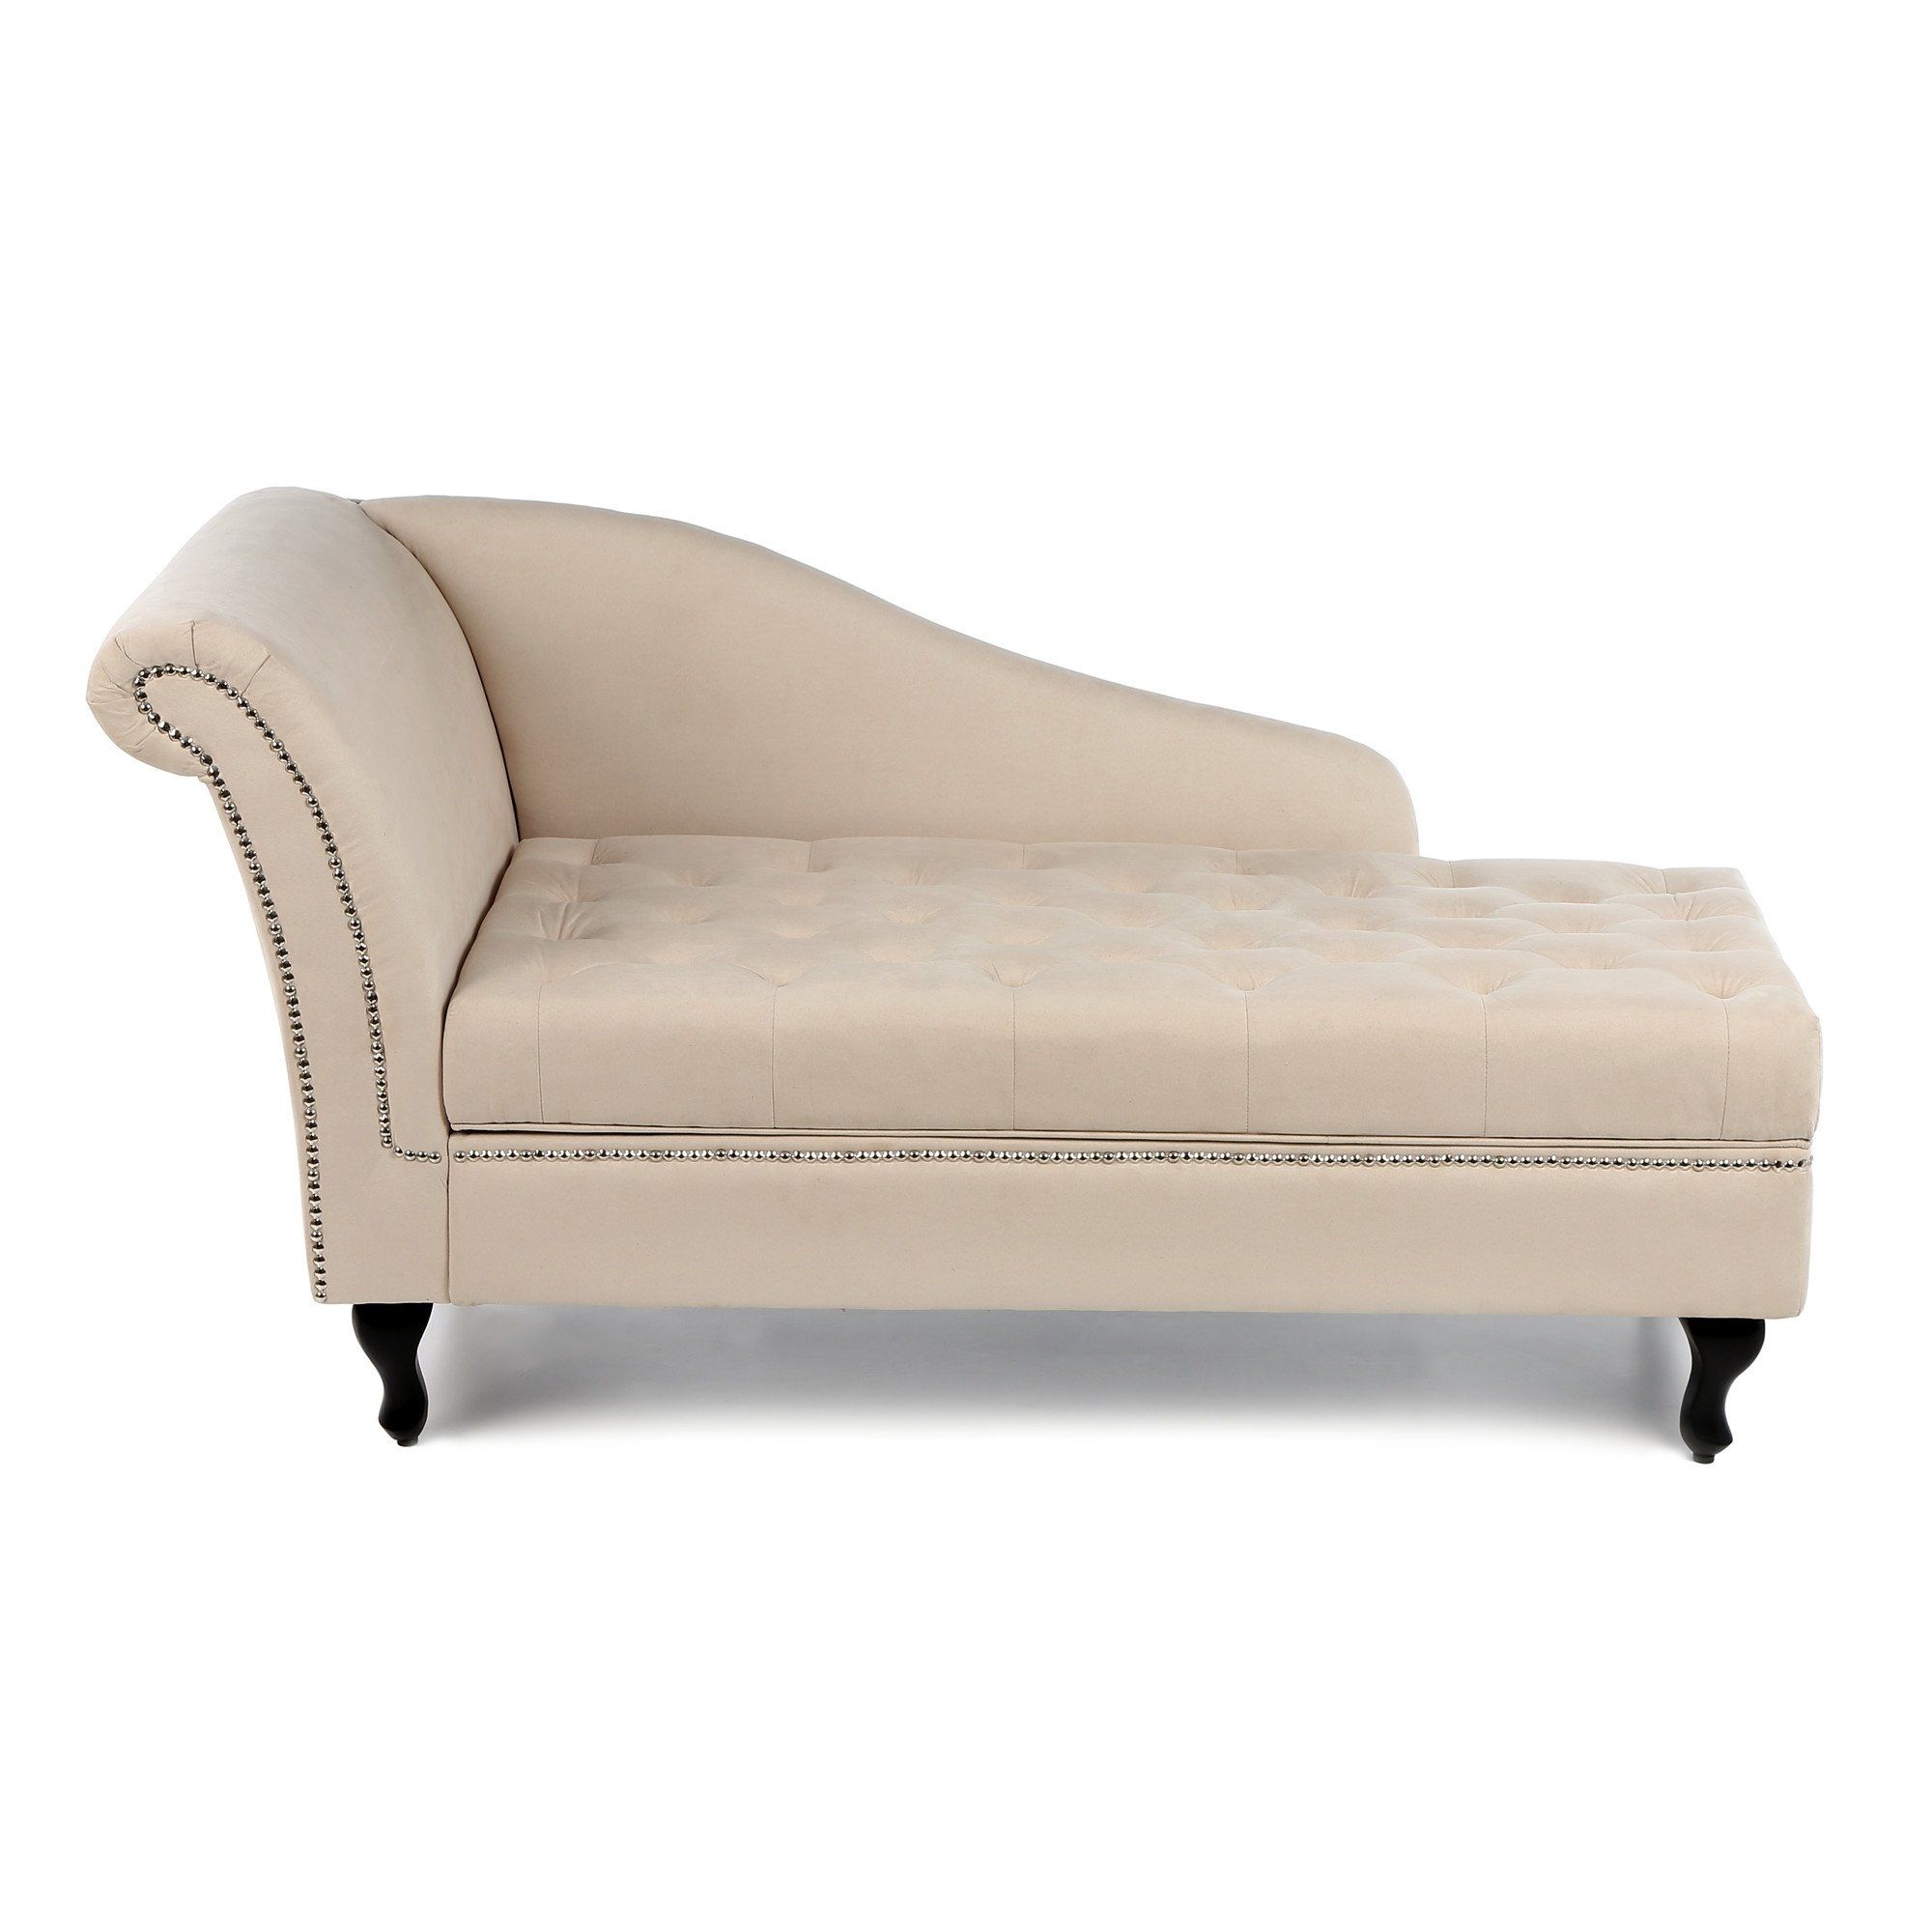 Luxury Chaise Lounge Chairs Intended For Well Liked $300 Amazon – Storage Chaise Lounge Luxurious Tufted Classic (Photo 14 of 15)